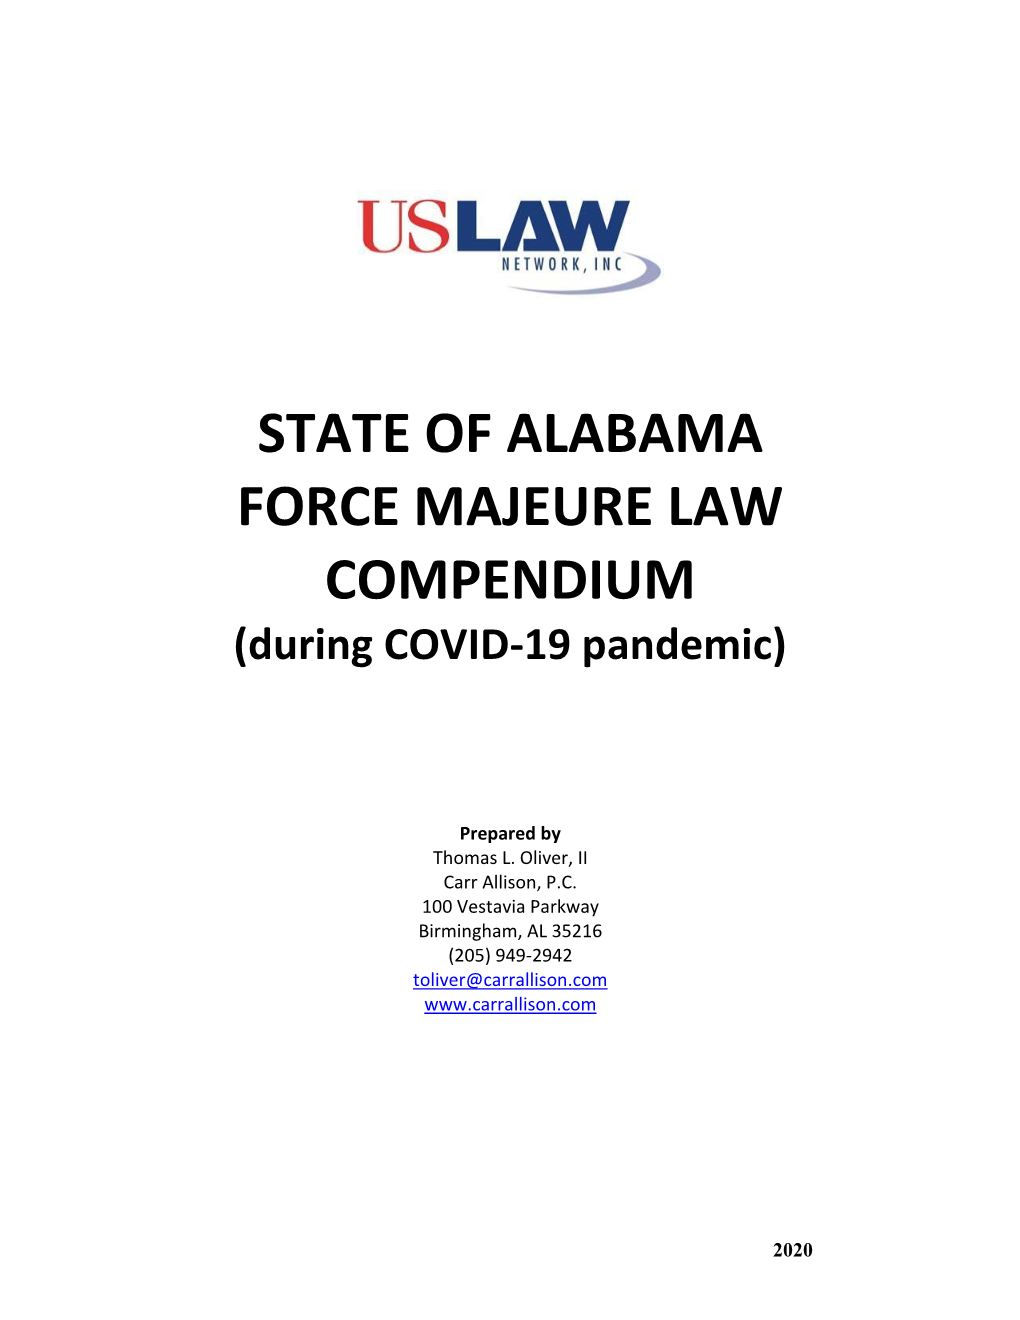 STATE of ALABAMA FORCE MAJEURE LAW COMPENDIUM (During COVID-19 Pandemic)